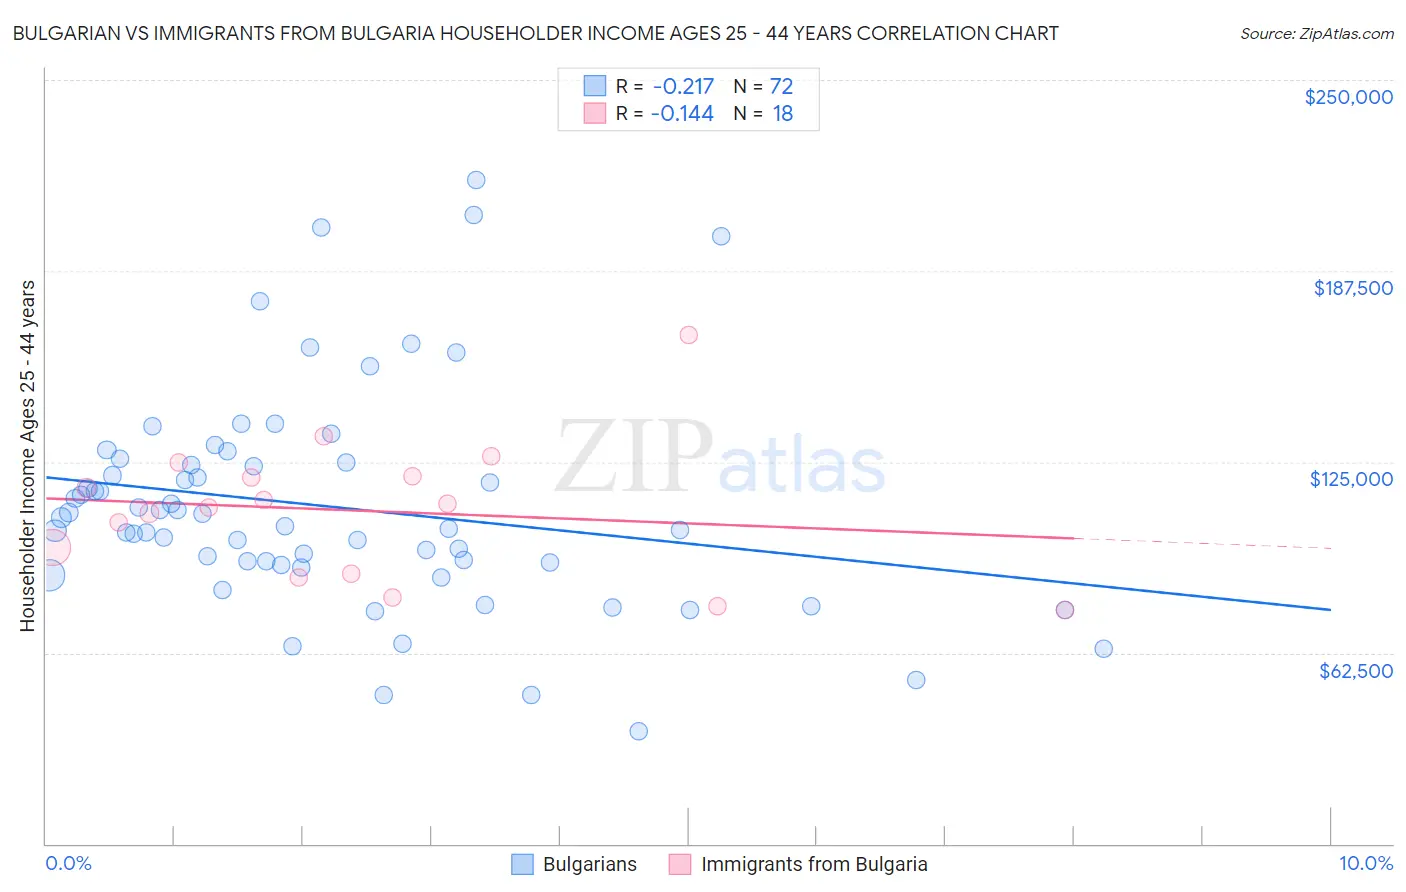 Bulgarian vs Immigrants from Bulgaria Householder Income Ages 25 - 44 years